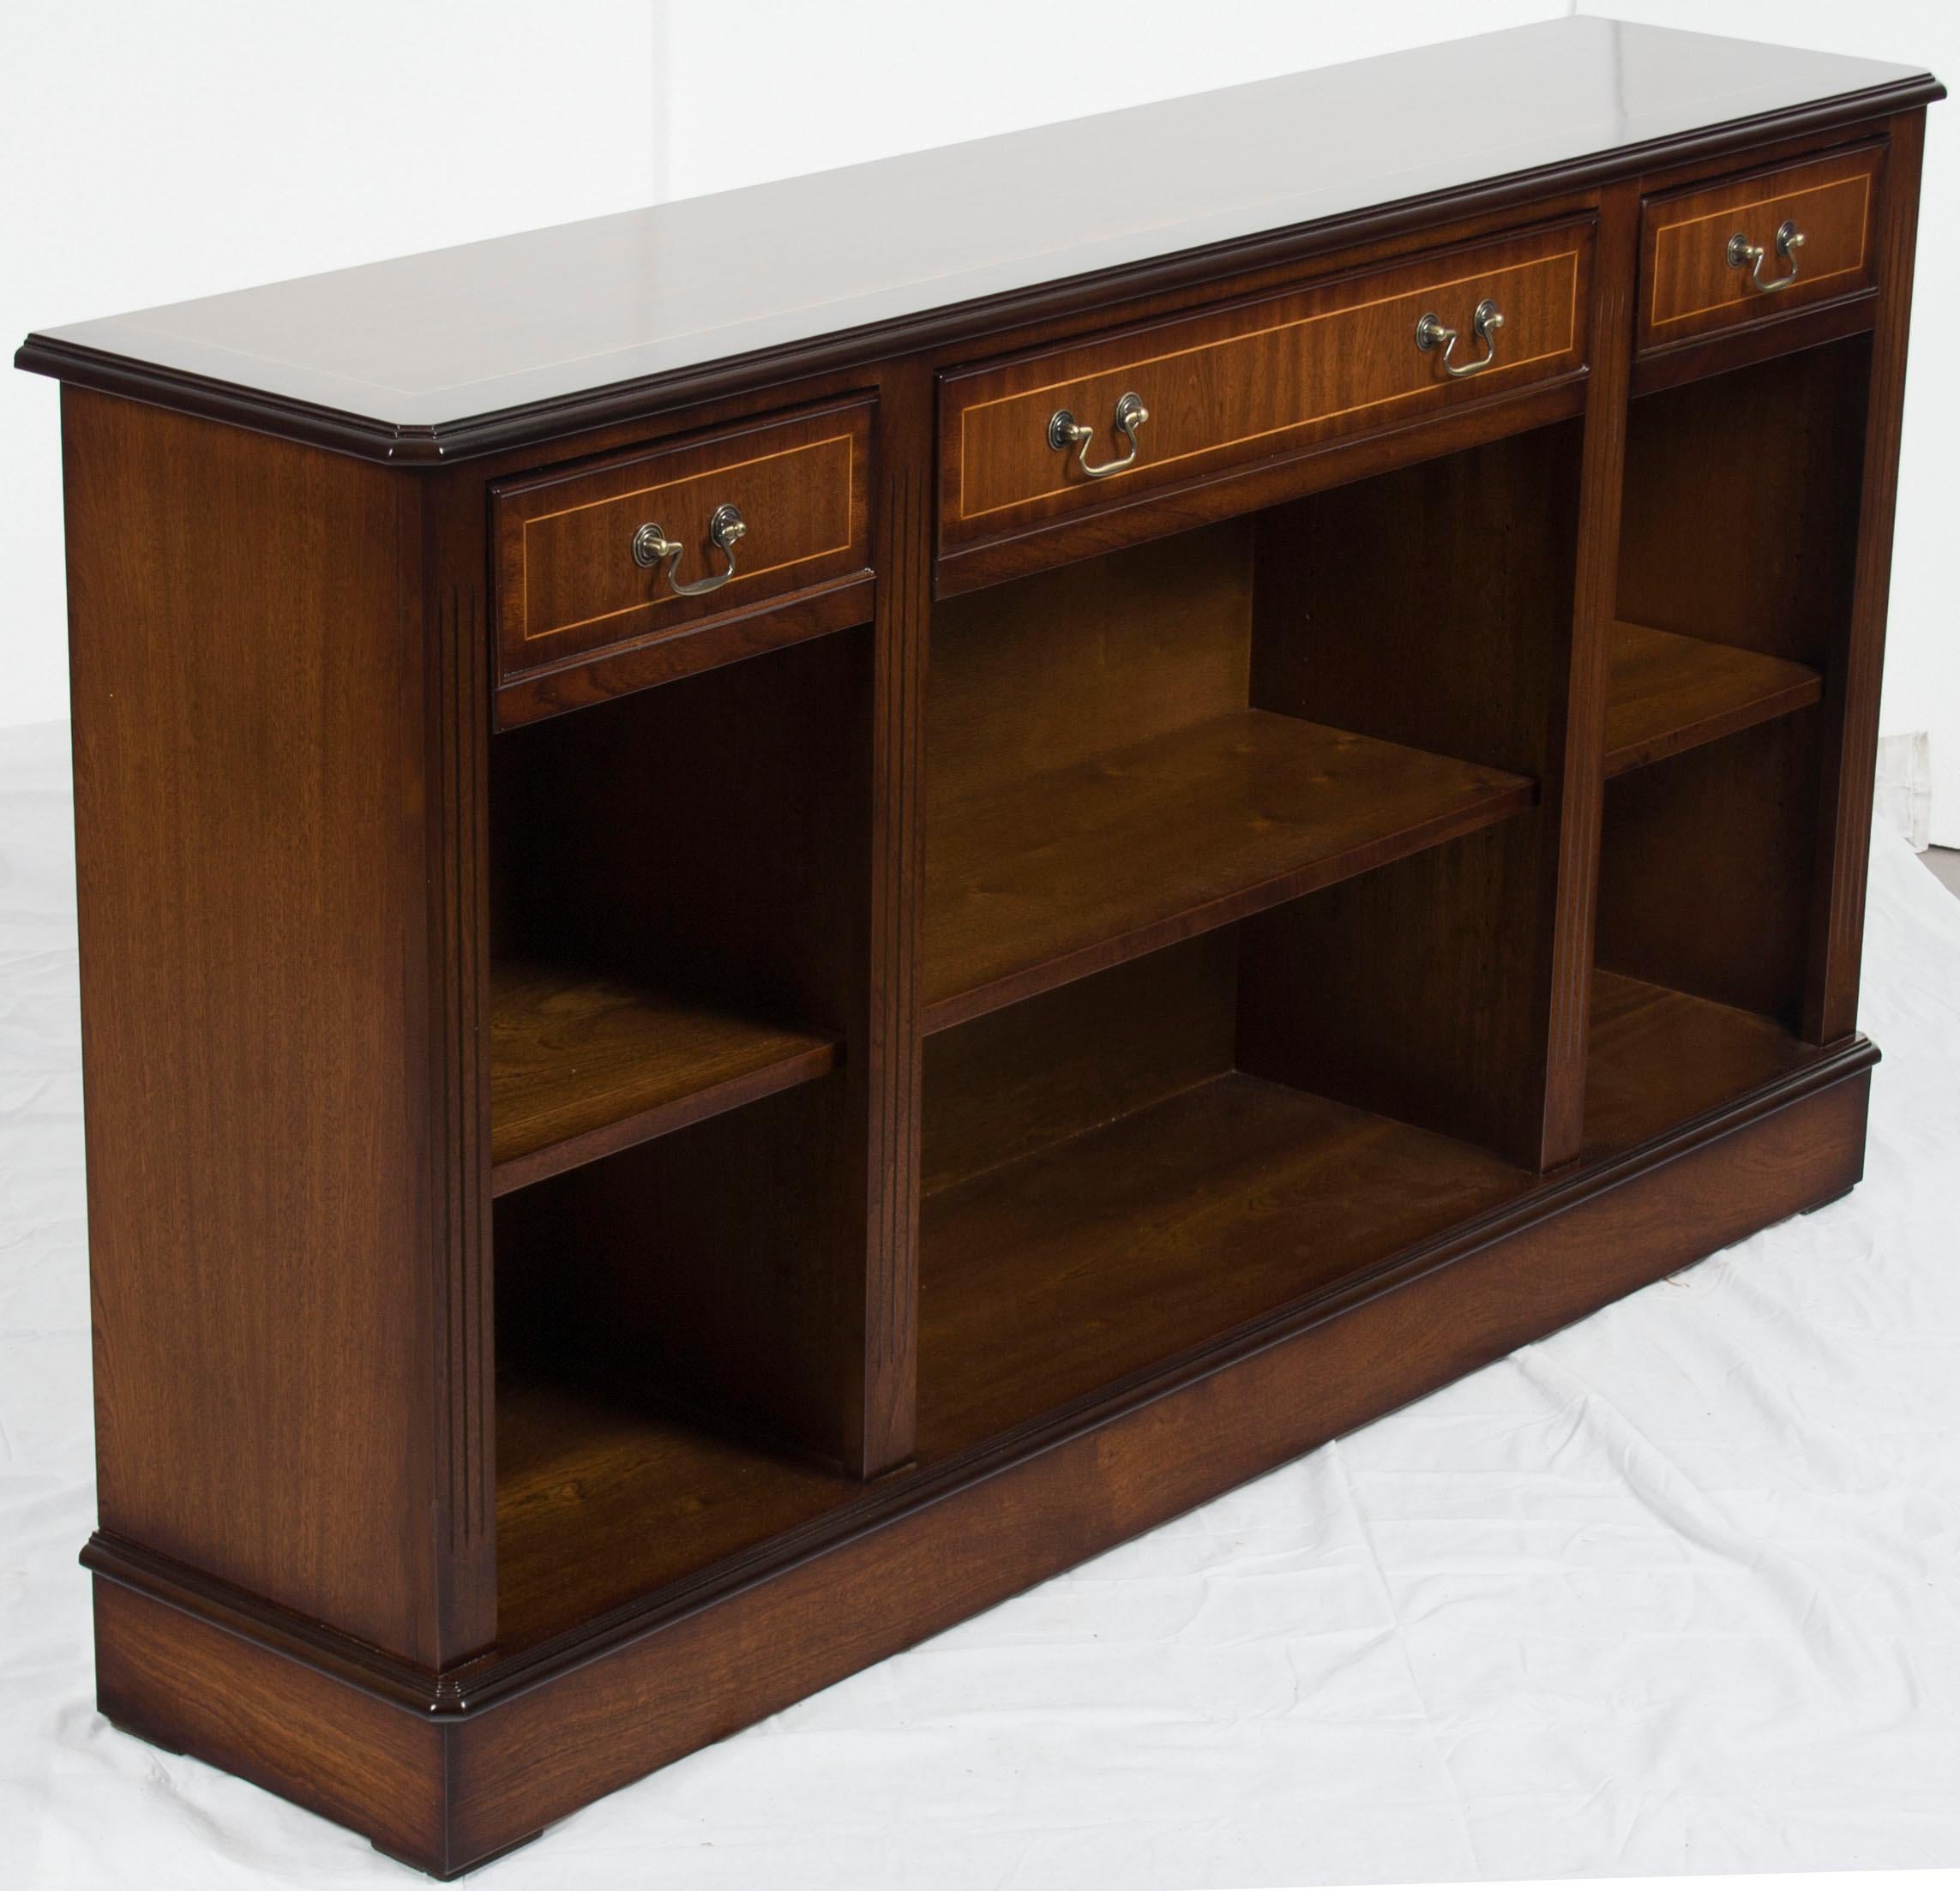 Contemporary Low Long Narrow Open Mahogany Bookcase with Drawers